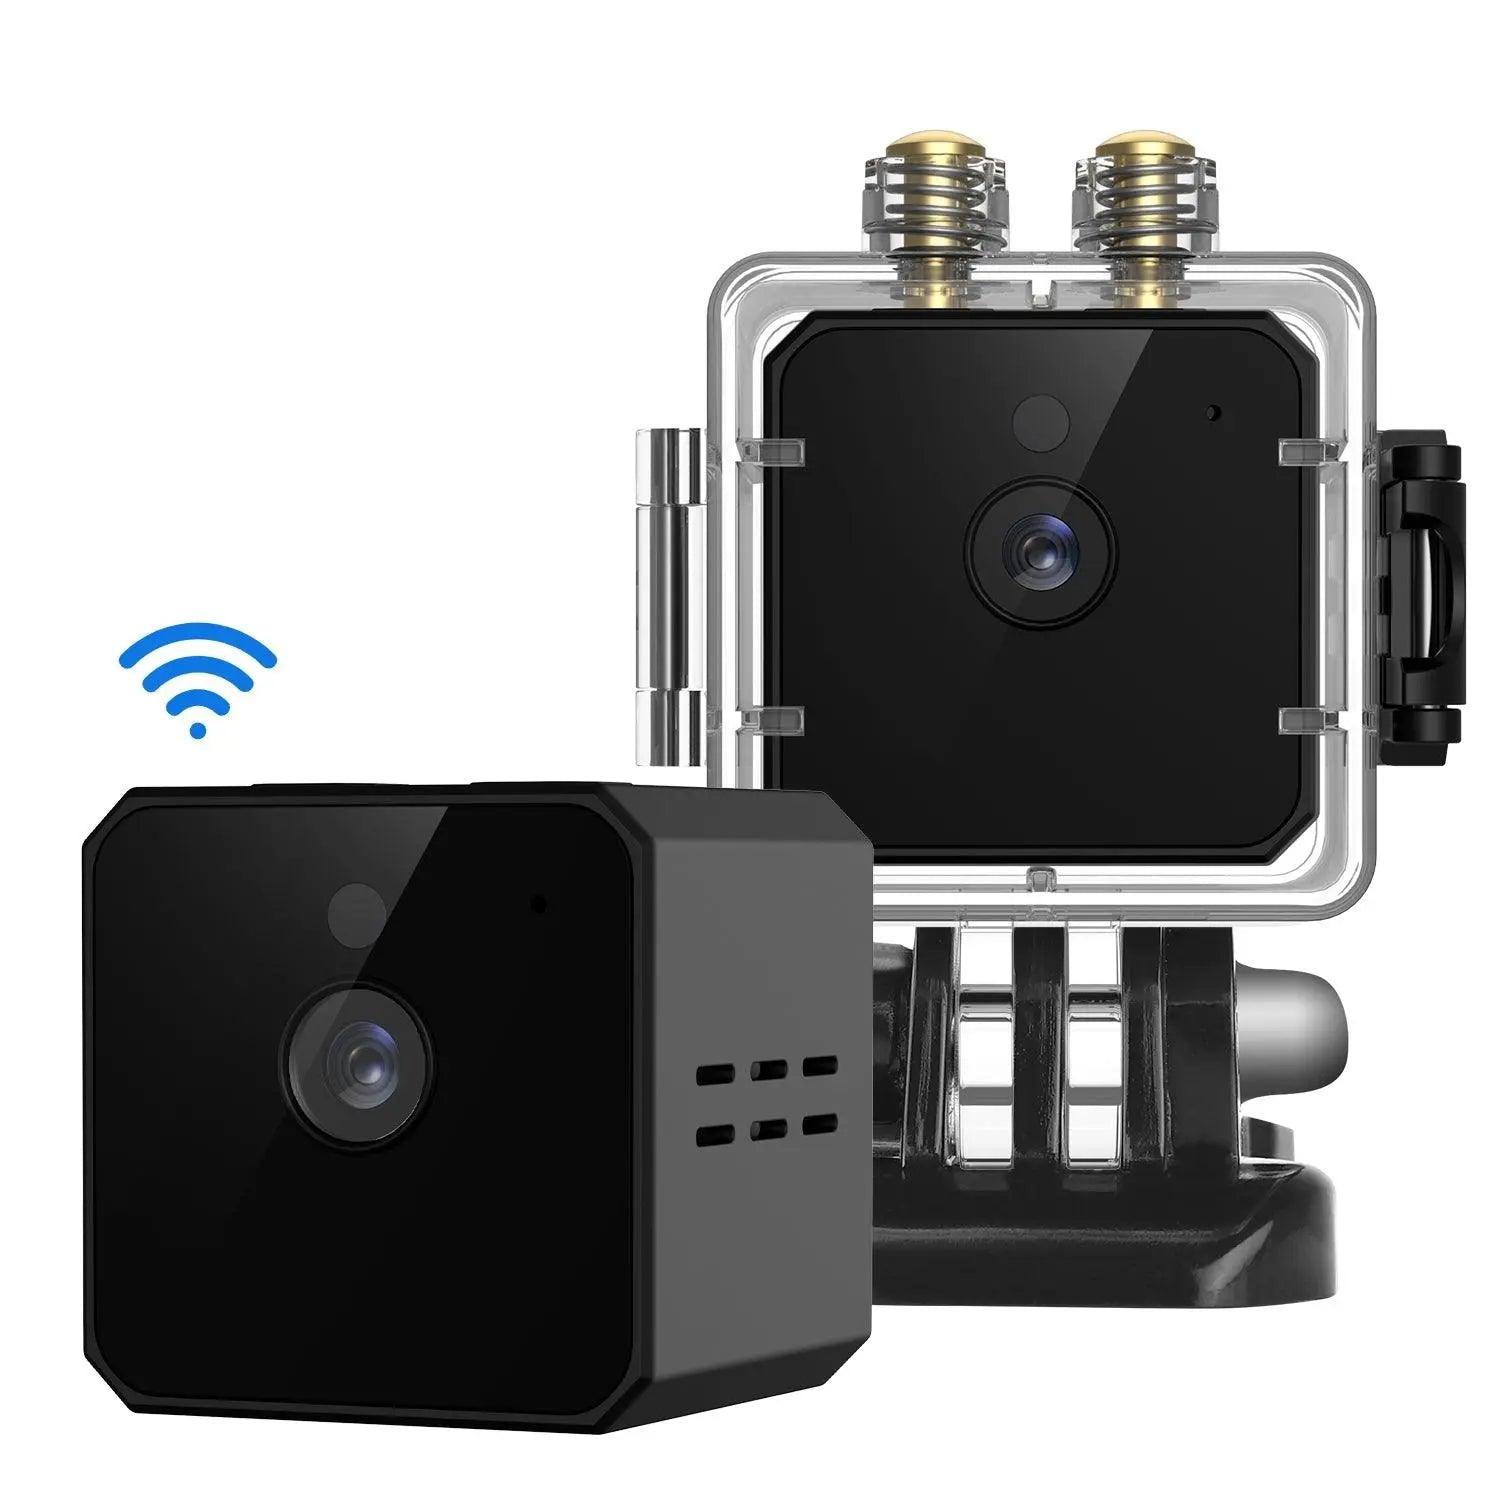 Waterproof WiFi Camera with 4K HD Video, Magnetic Body and Mount, Motion Detection, and 150 Degree Viewing Angle - Swayfer Tech